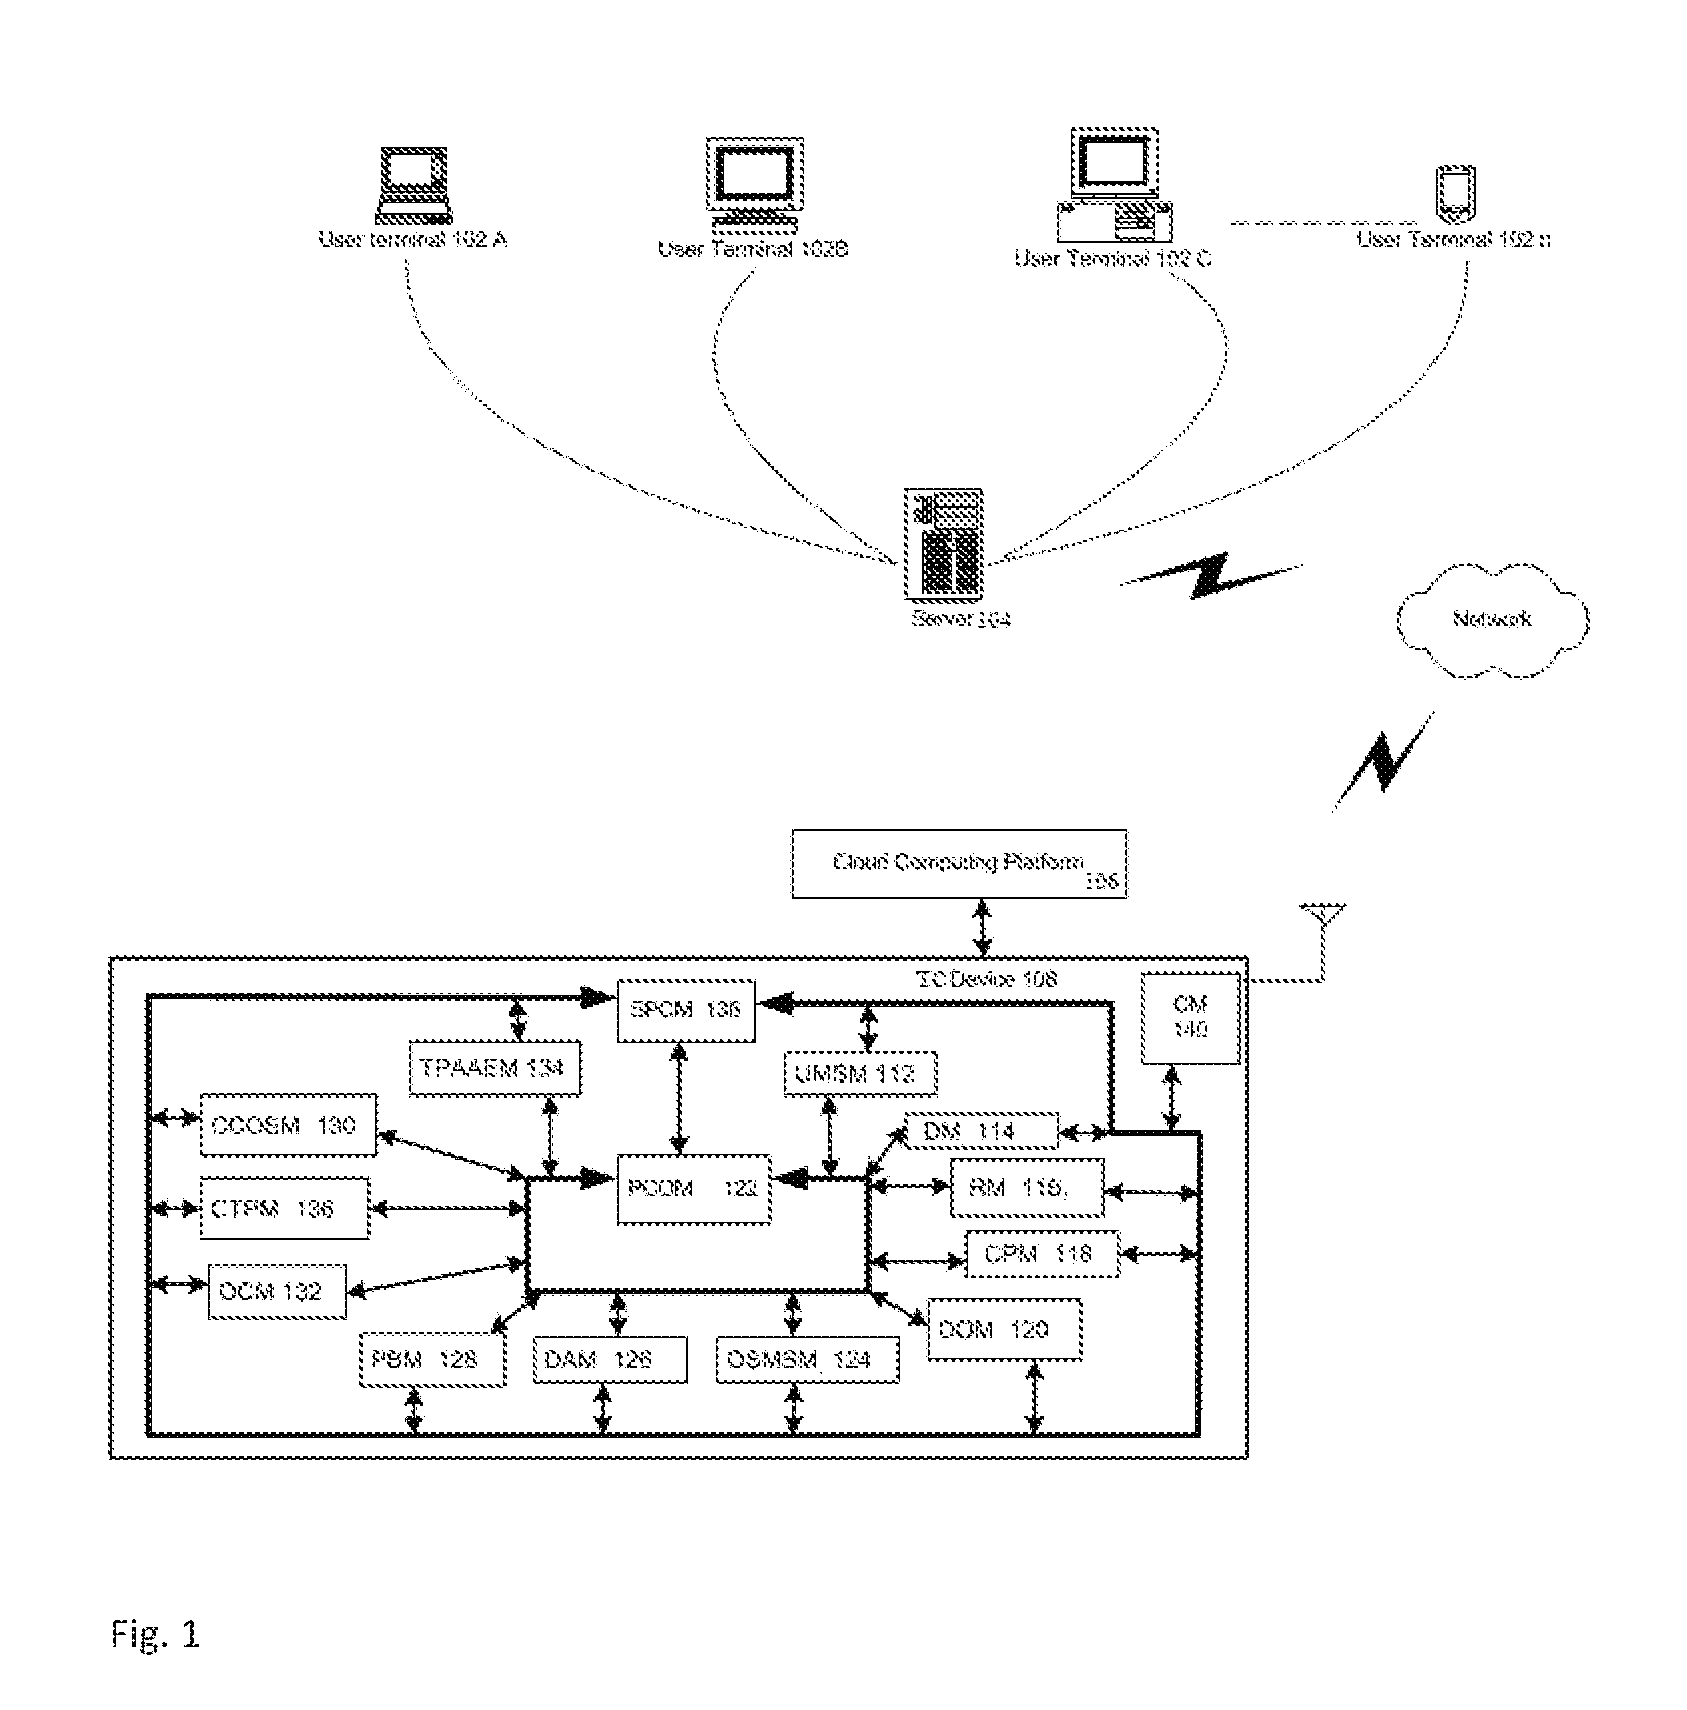 Method and System for Television Consumption